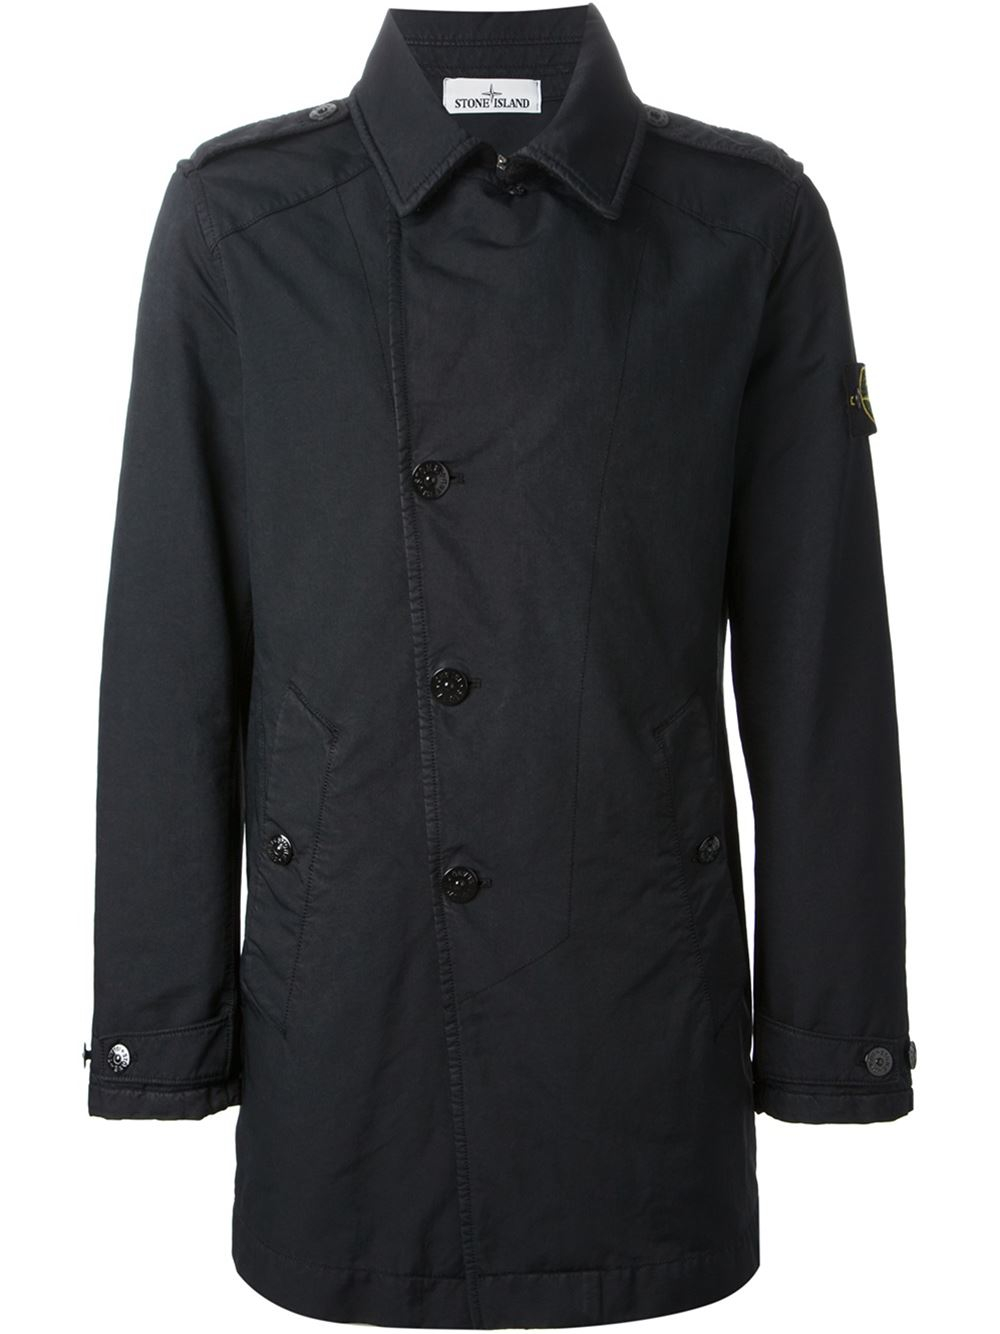 Stone Island Single Breasted Trench Coat in Blue for Men - Lyst